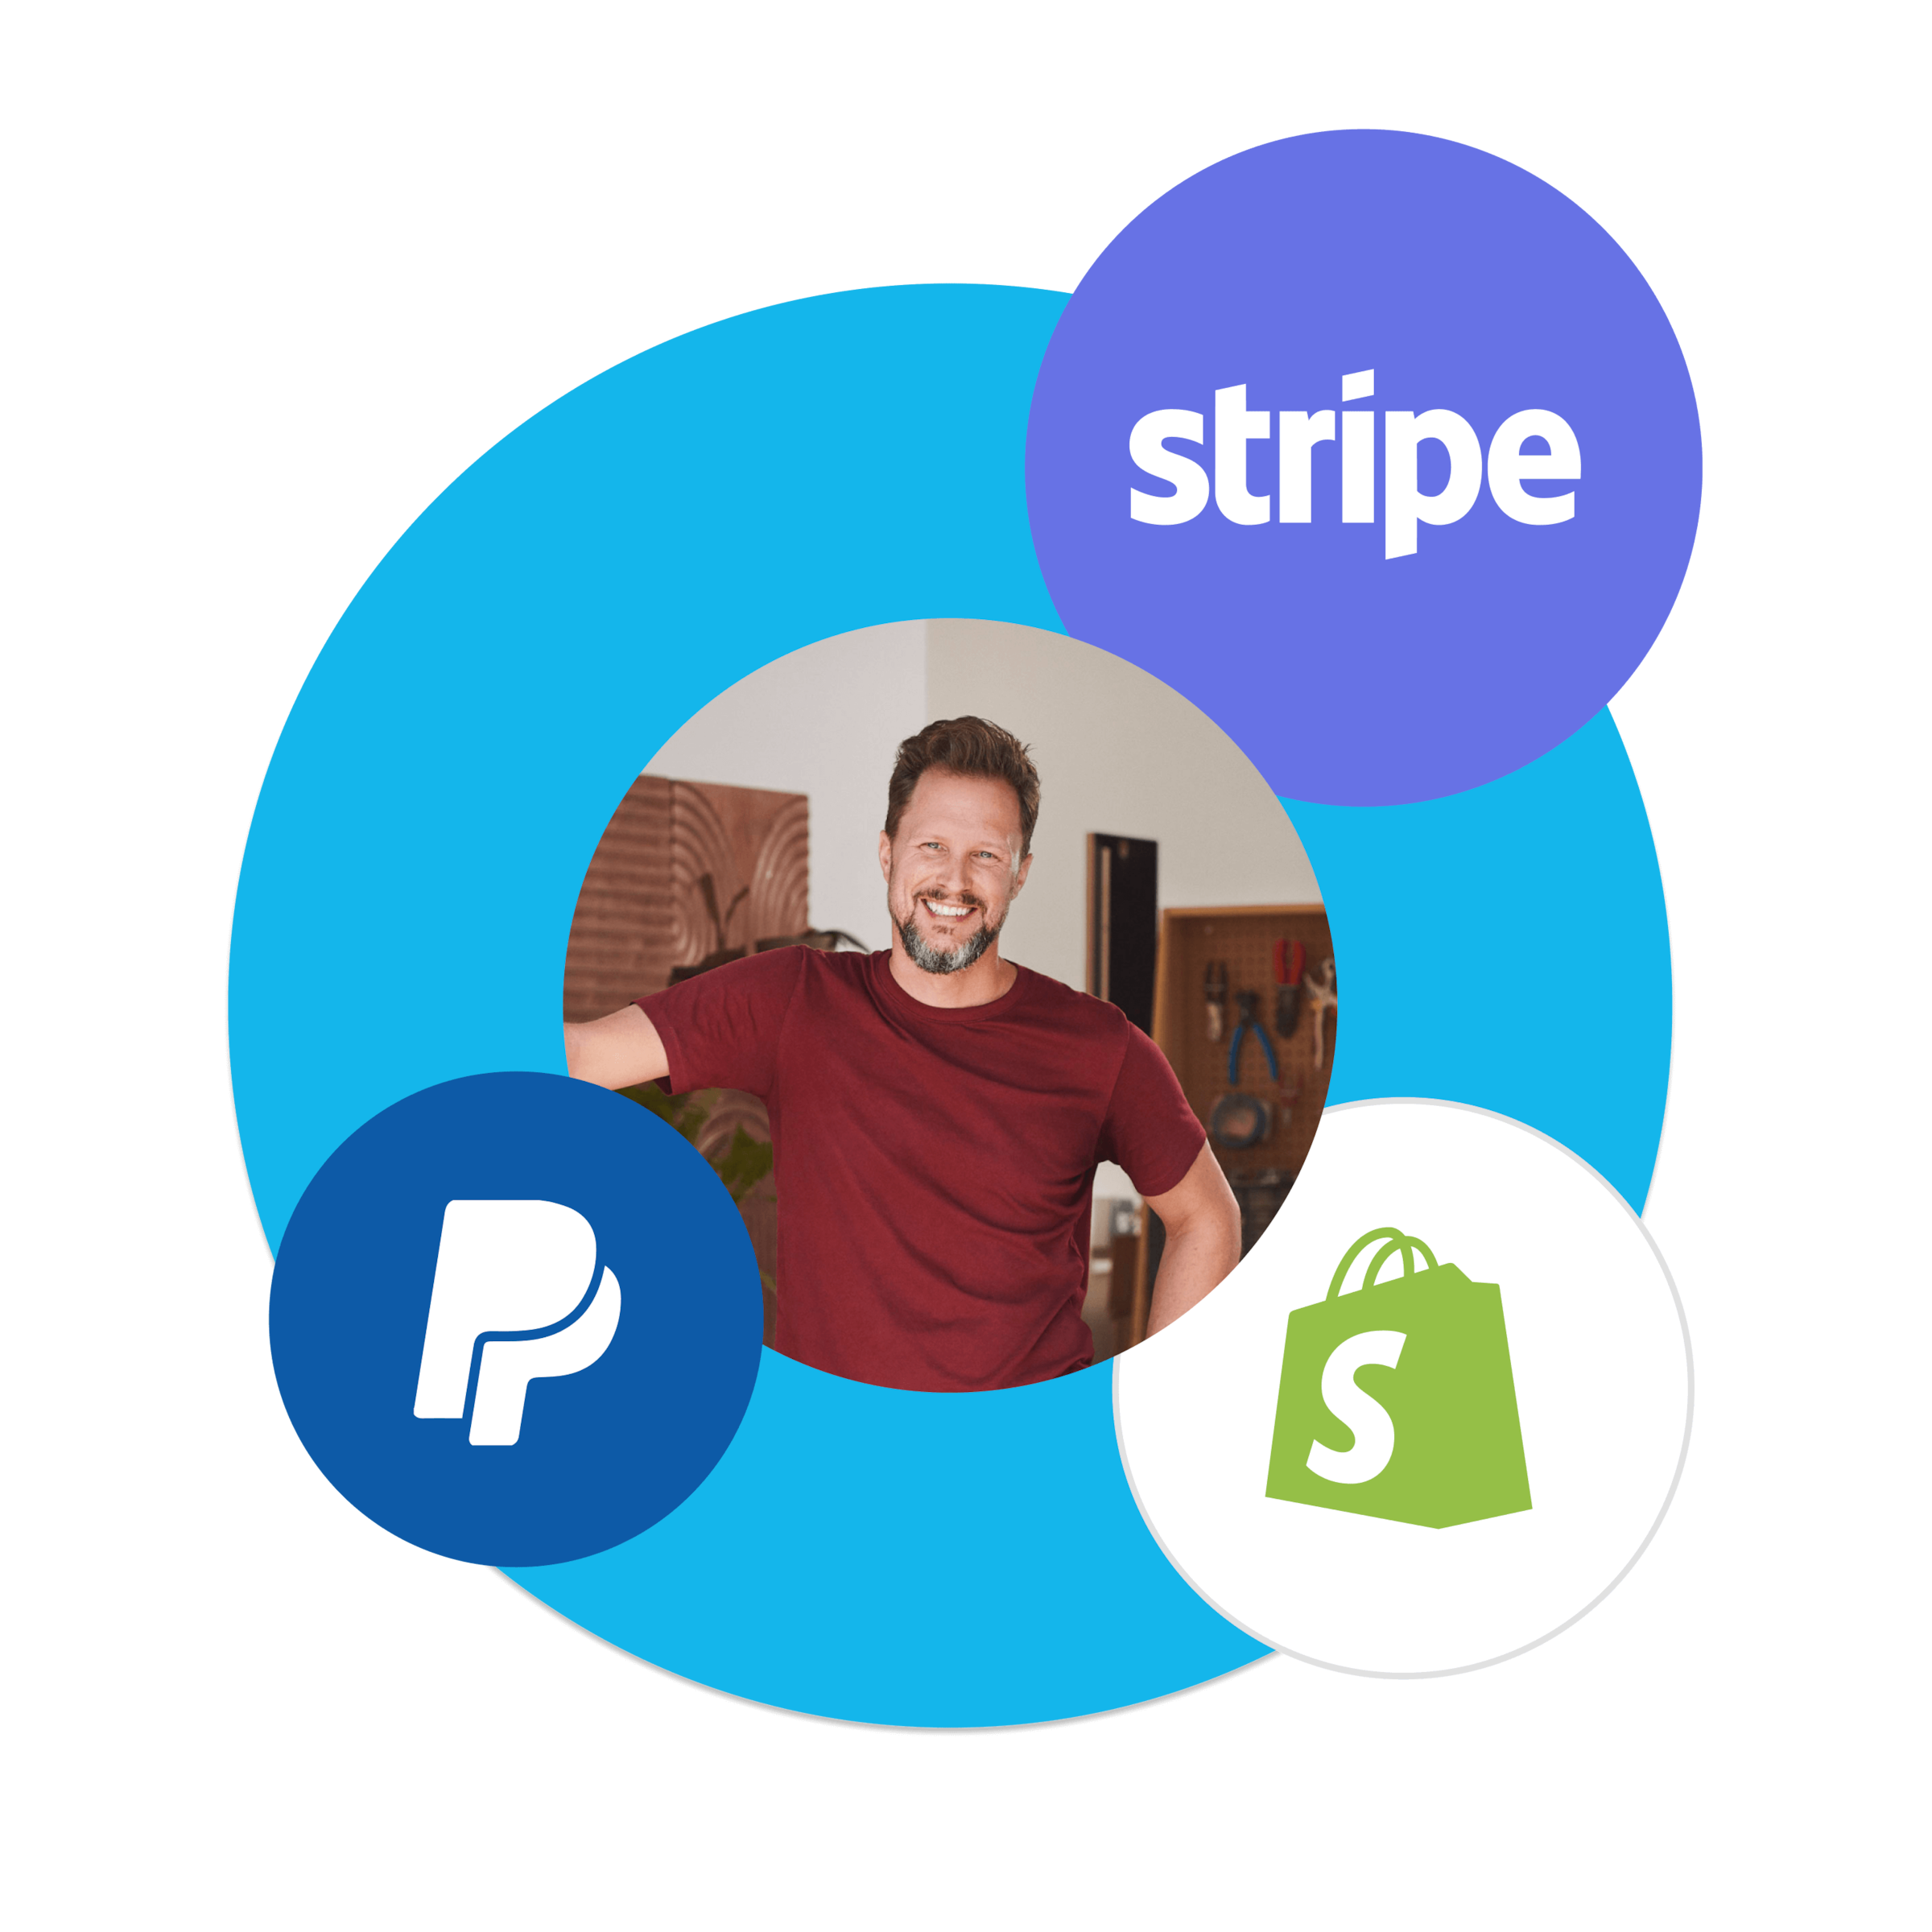 A gallery owner is pictured, encircled by  the Shopify, Stripe and Paypal logos.